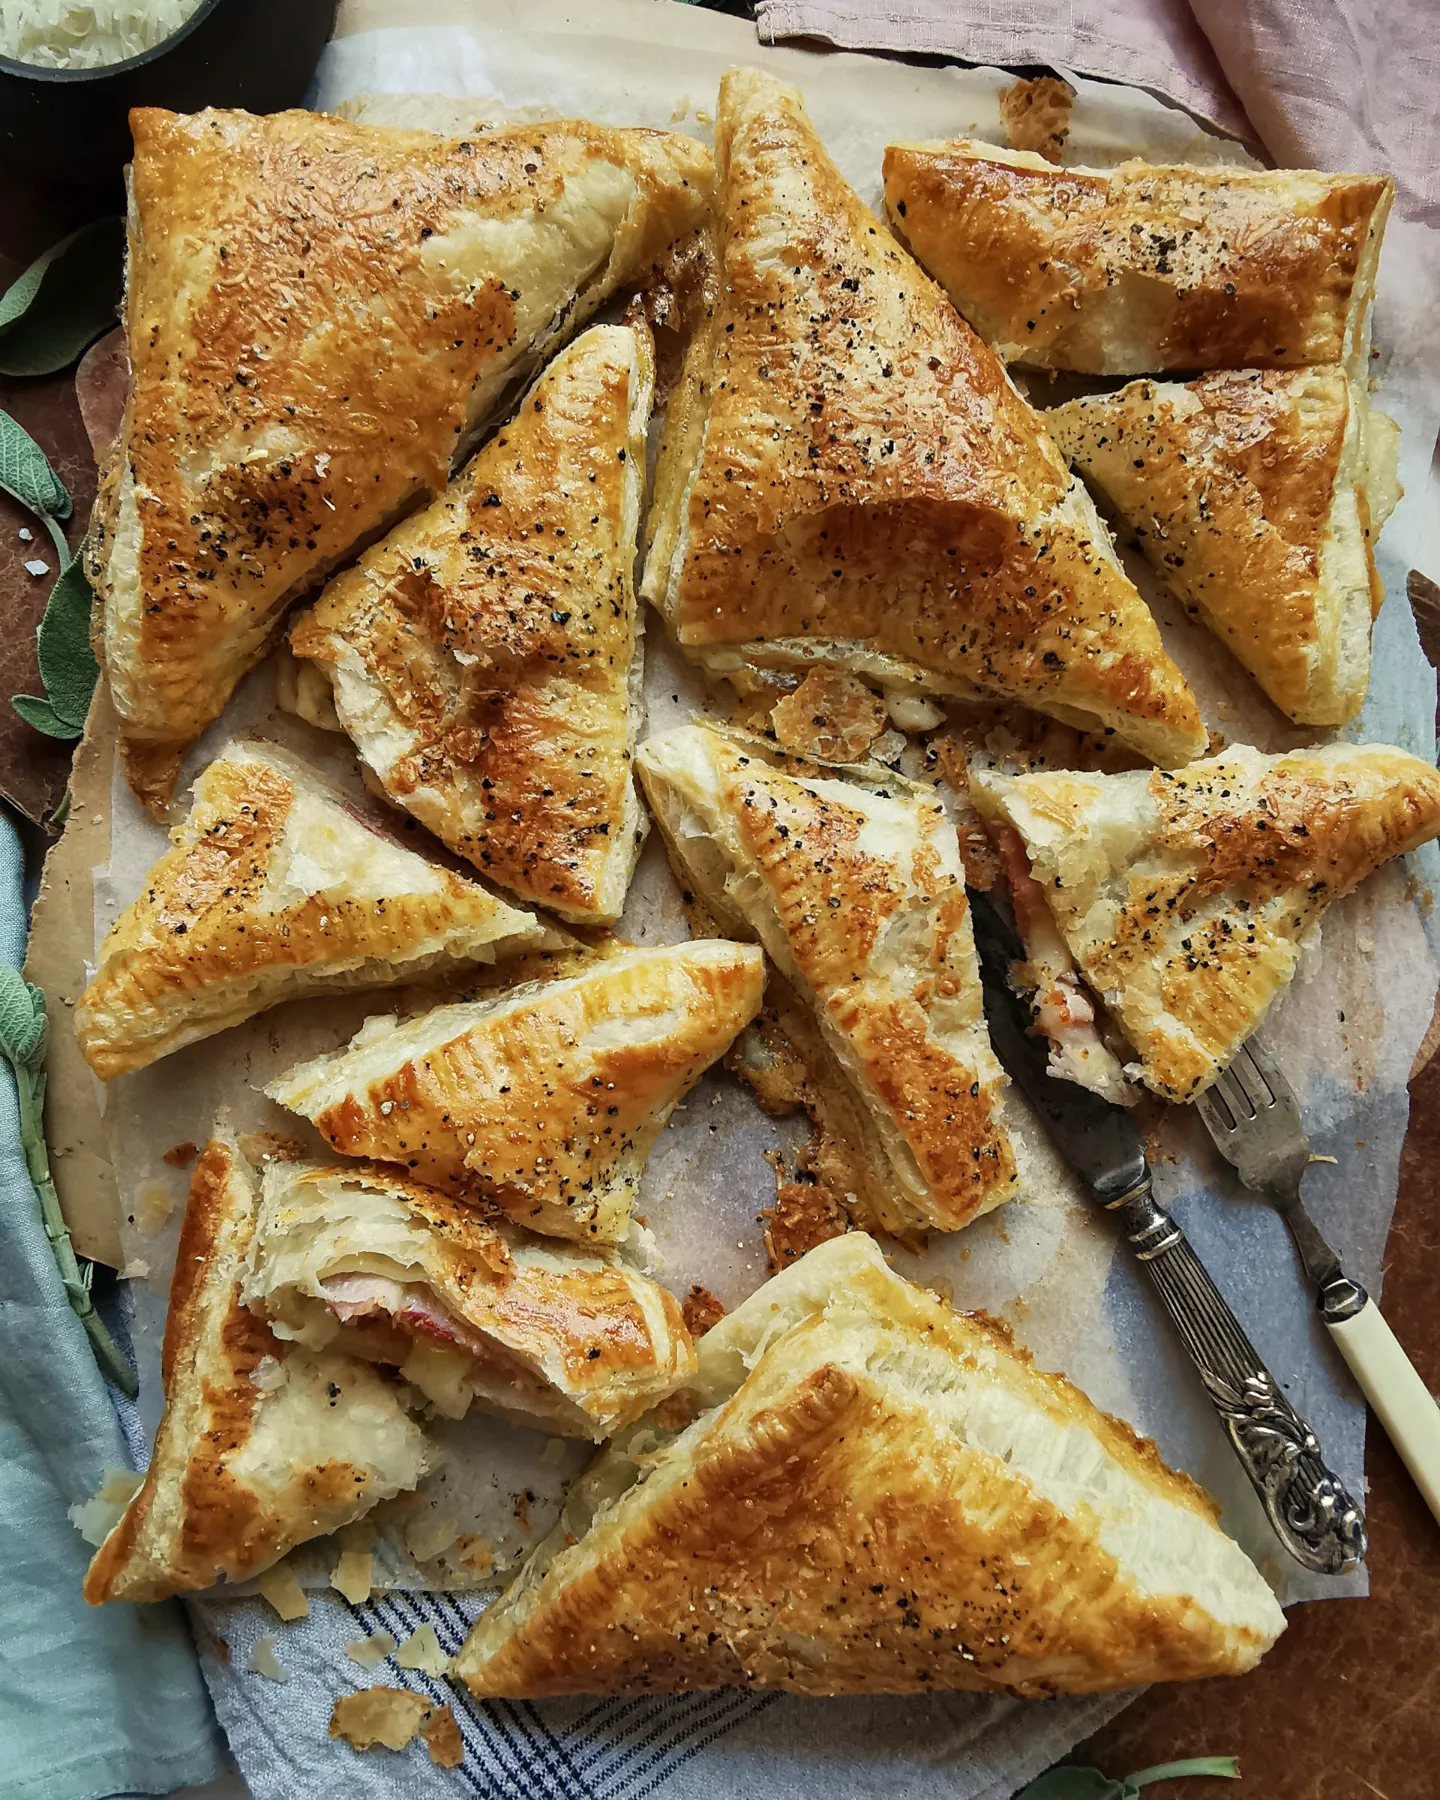 Prosciutto and cheese turnovers